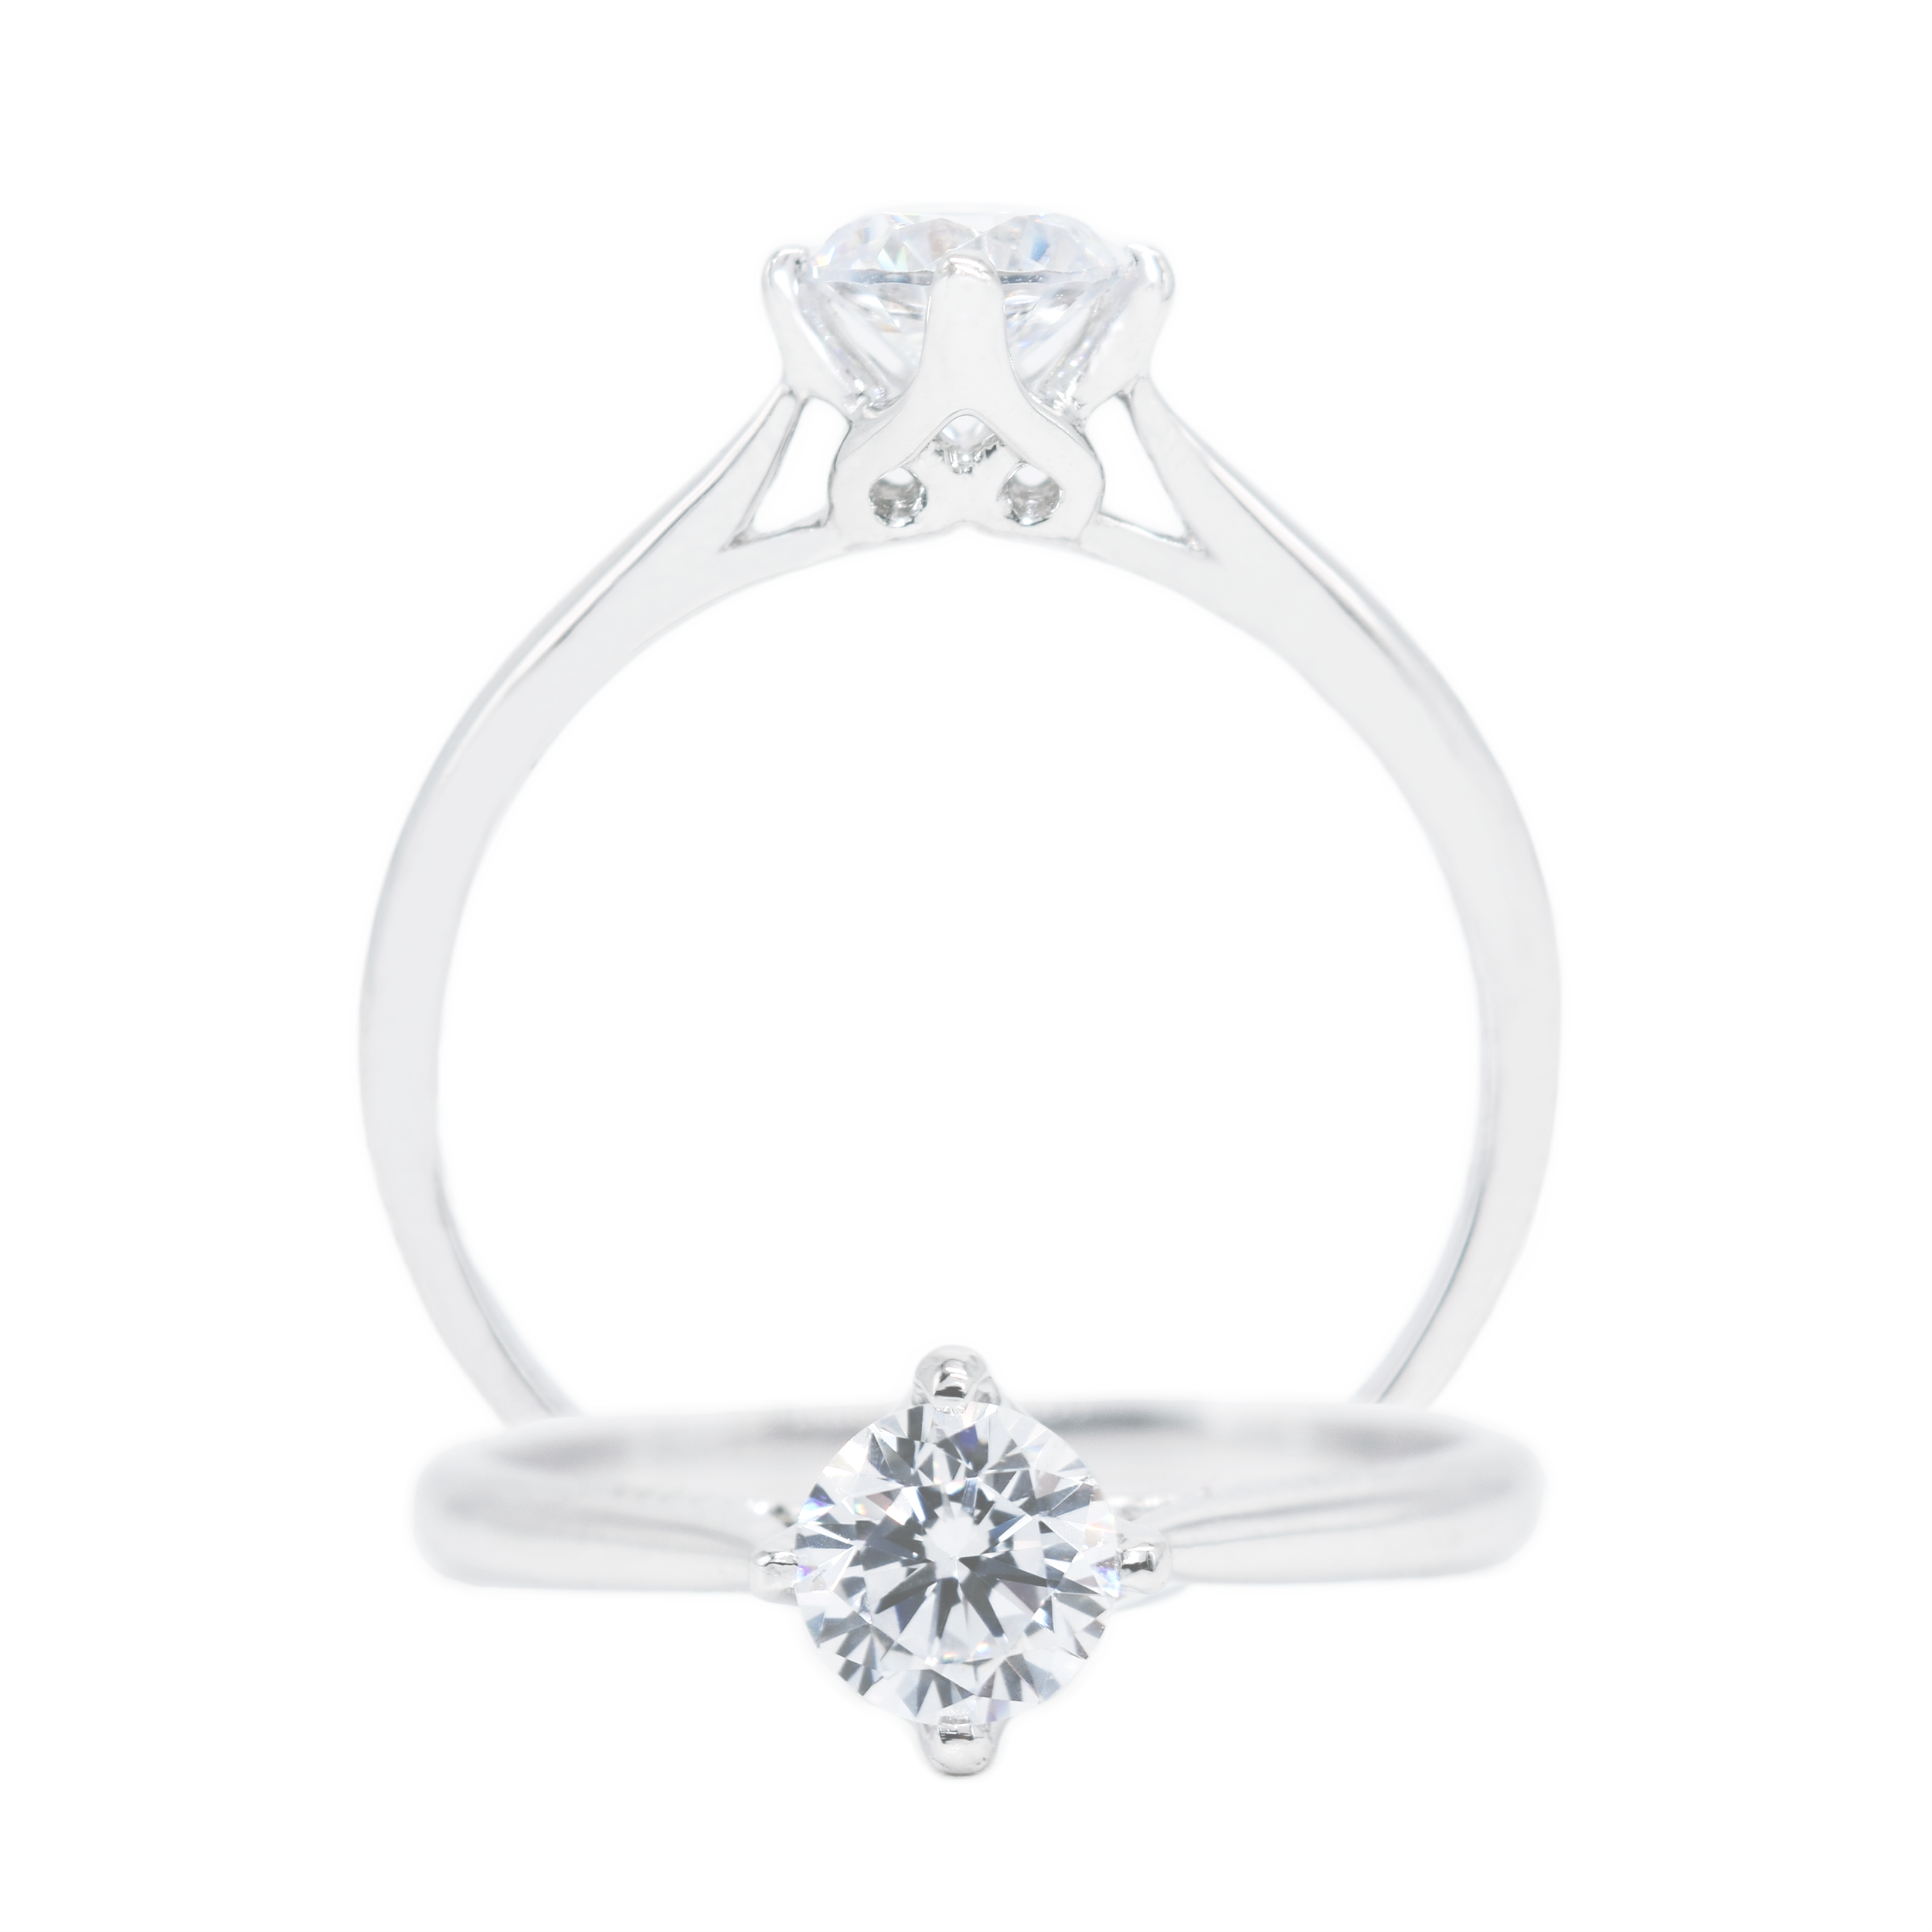 18 carat white-gold 4 prong flower pedal ring setting (setting only)